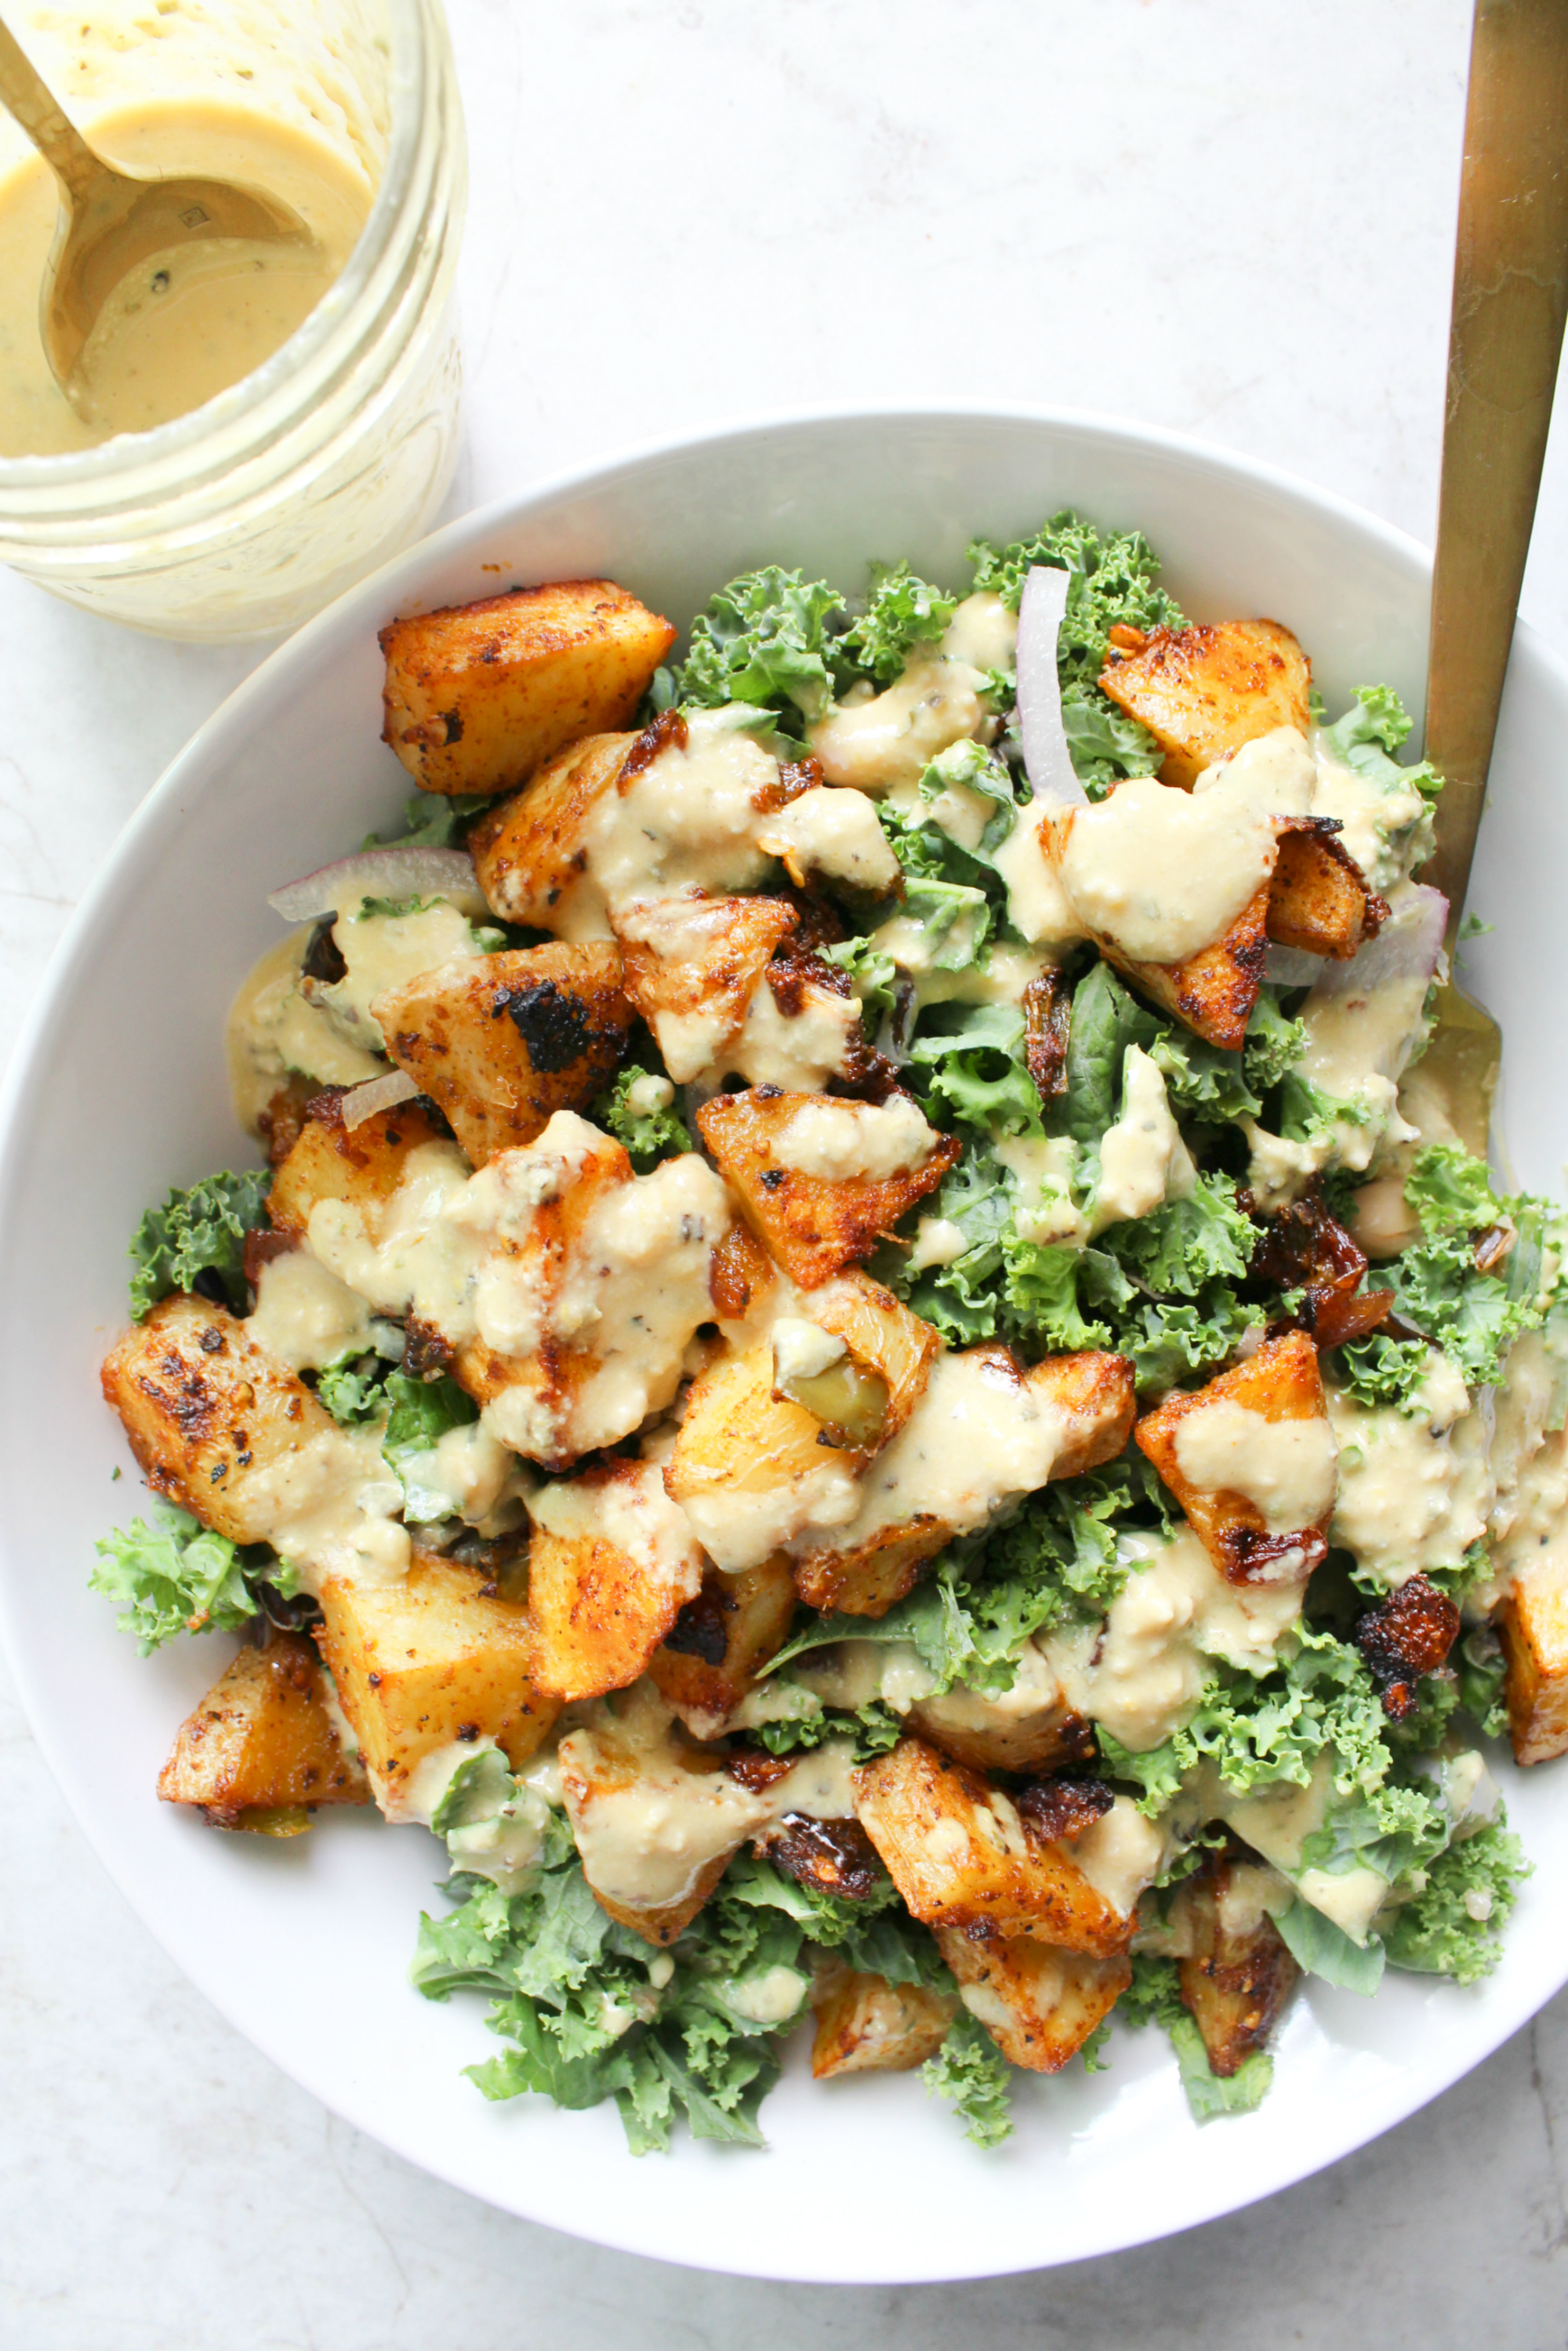 Spicy Potato Kale Bowls with Mustard Tahini Dressing